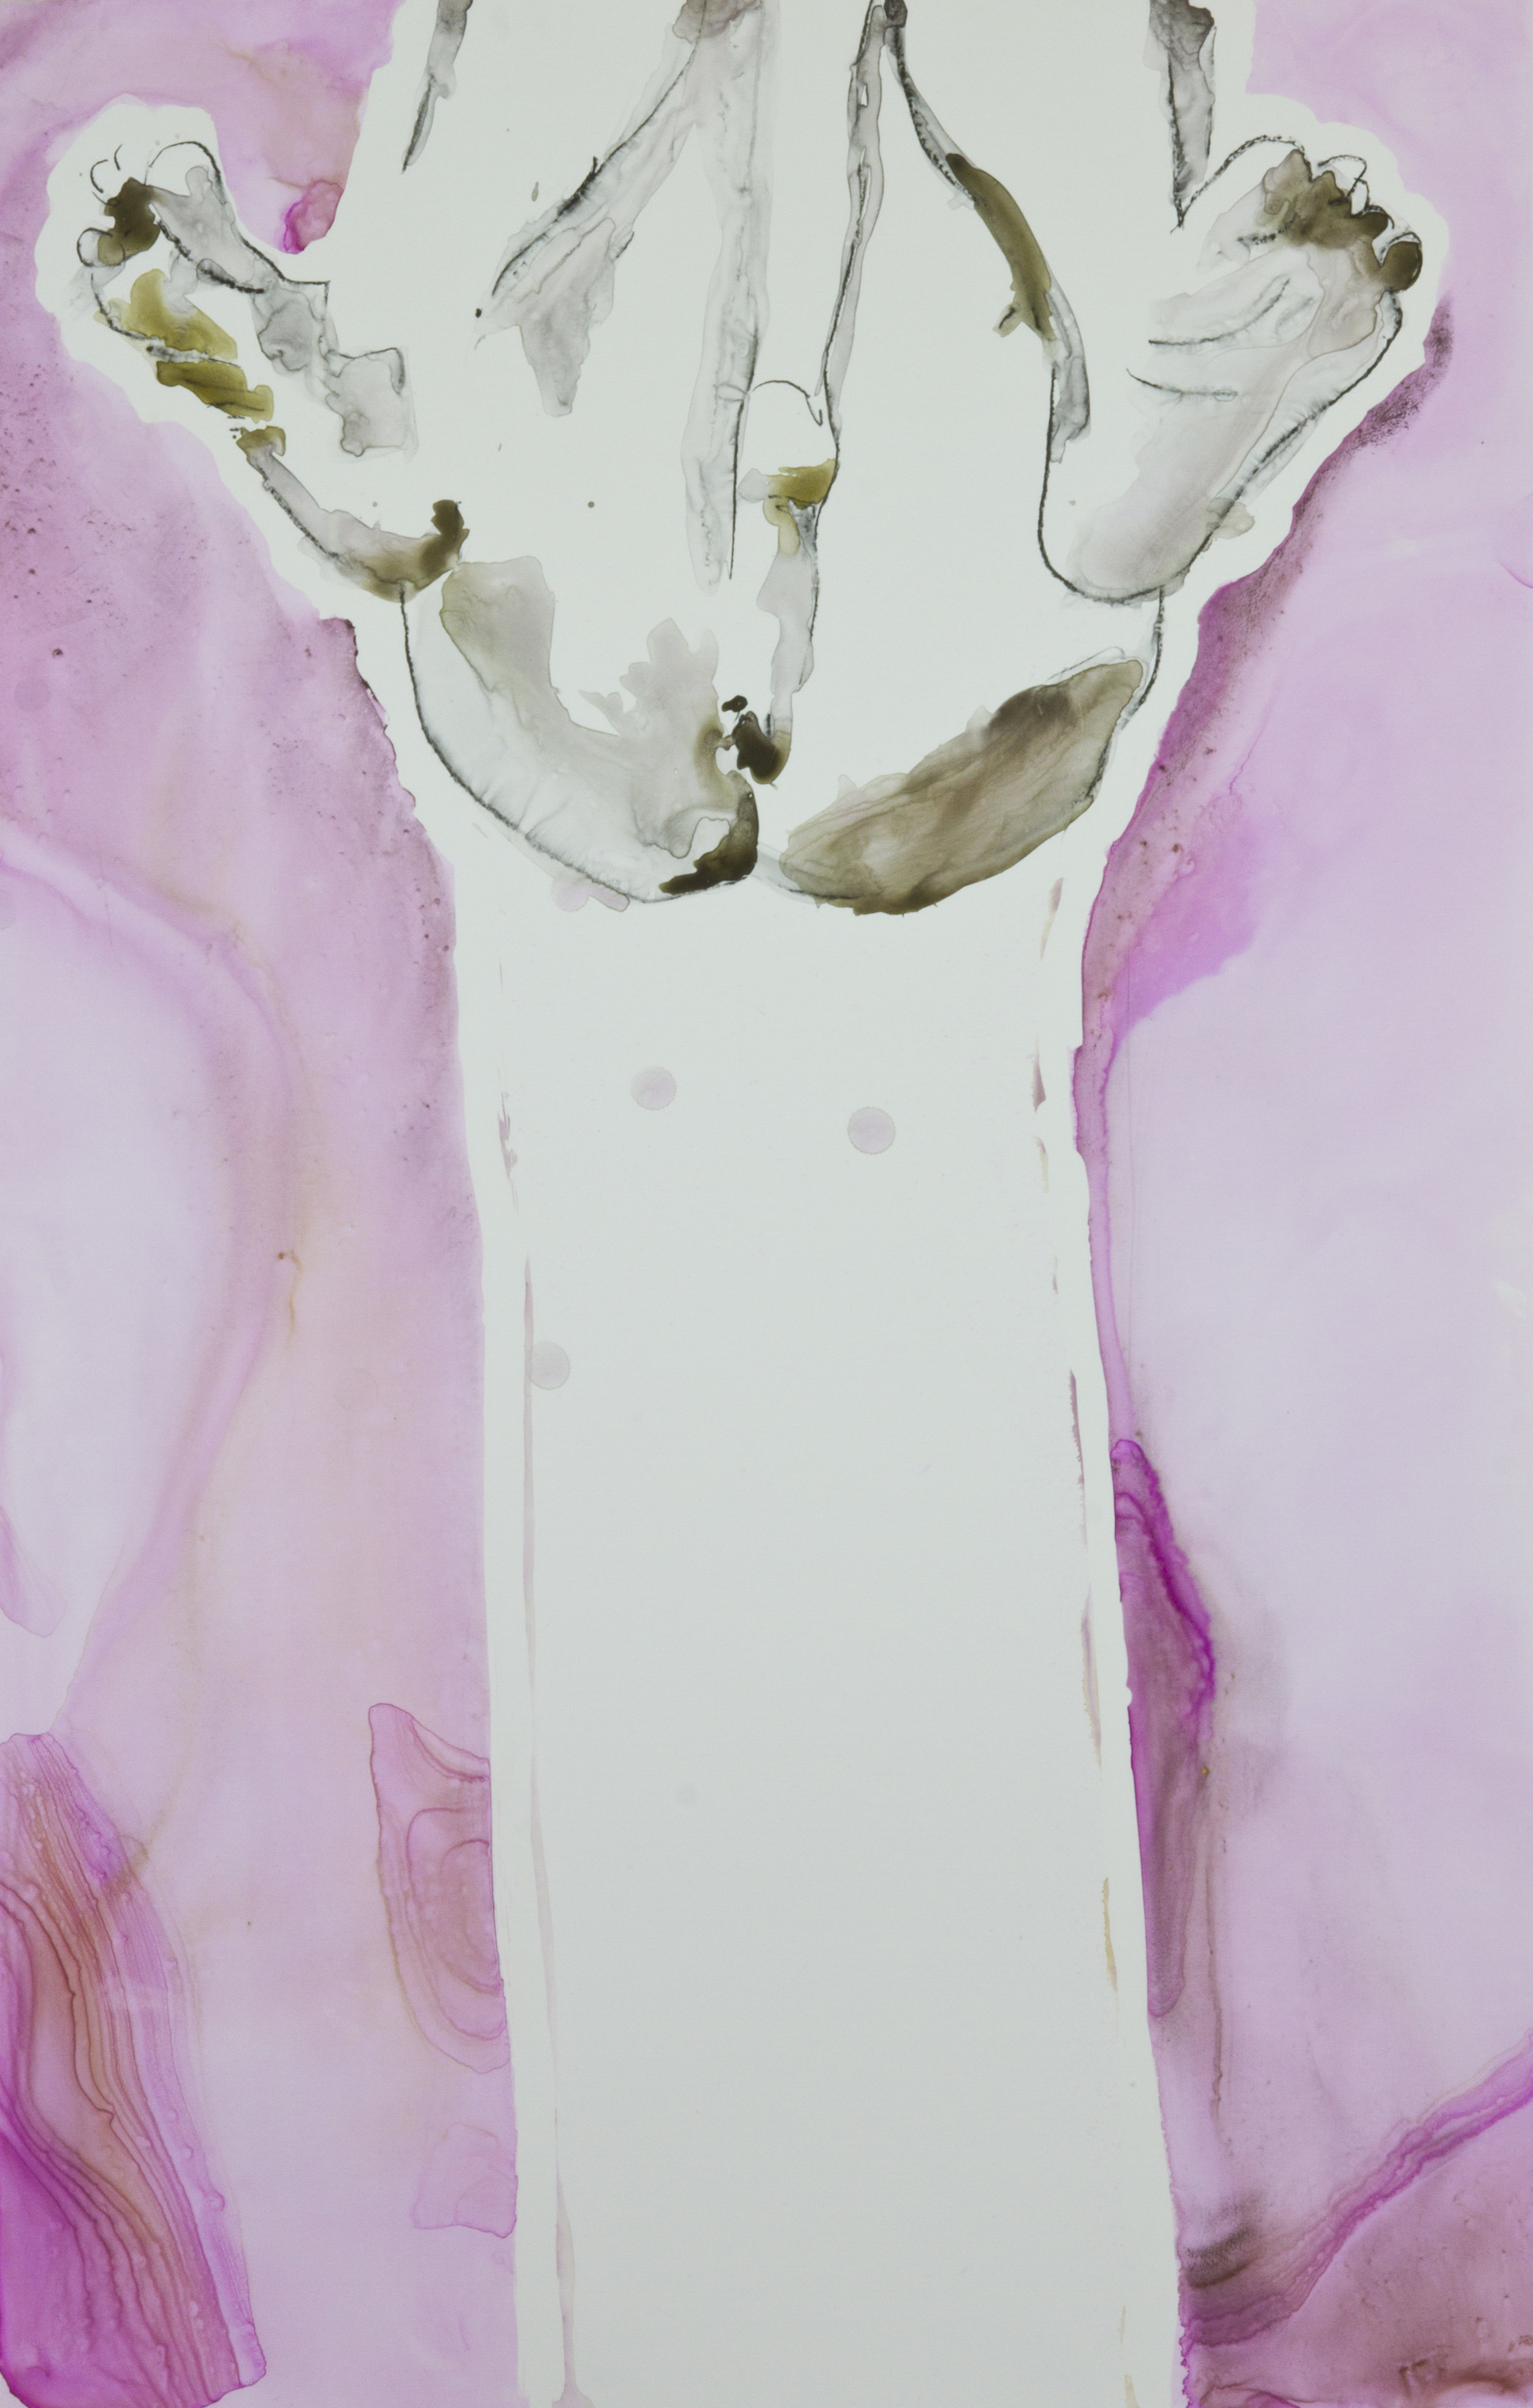 Pink Passage, 2012, watercolor and acrylic on polypropylene, 26x40 inches